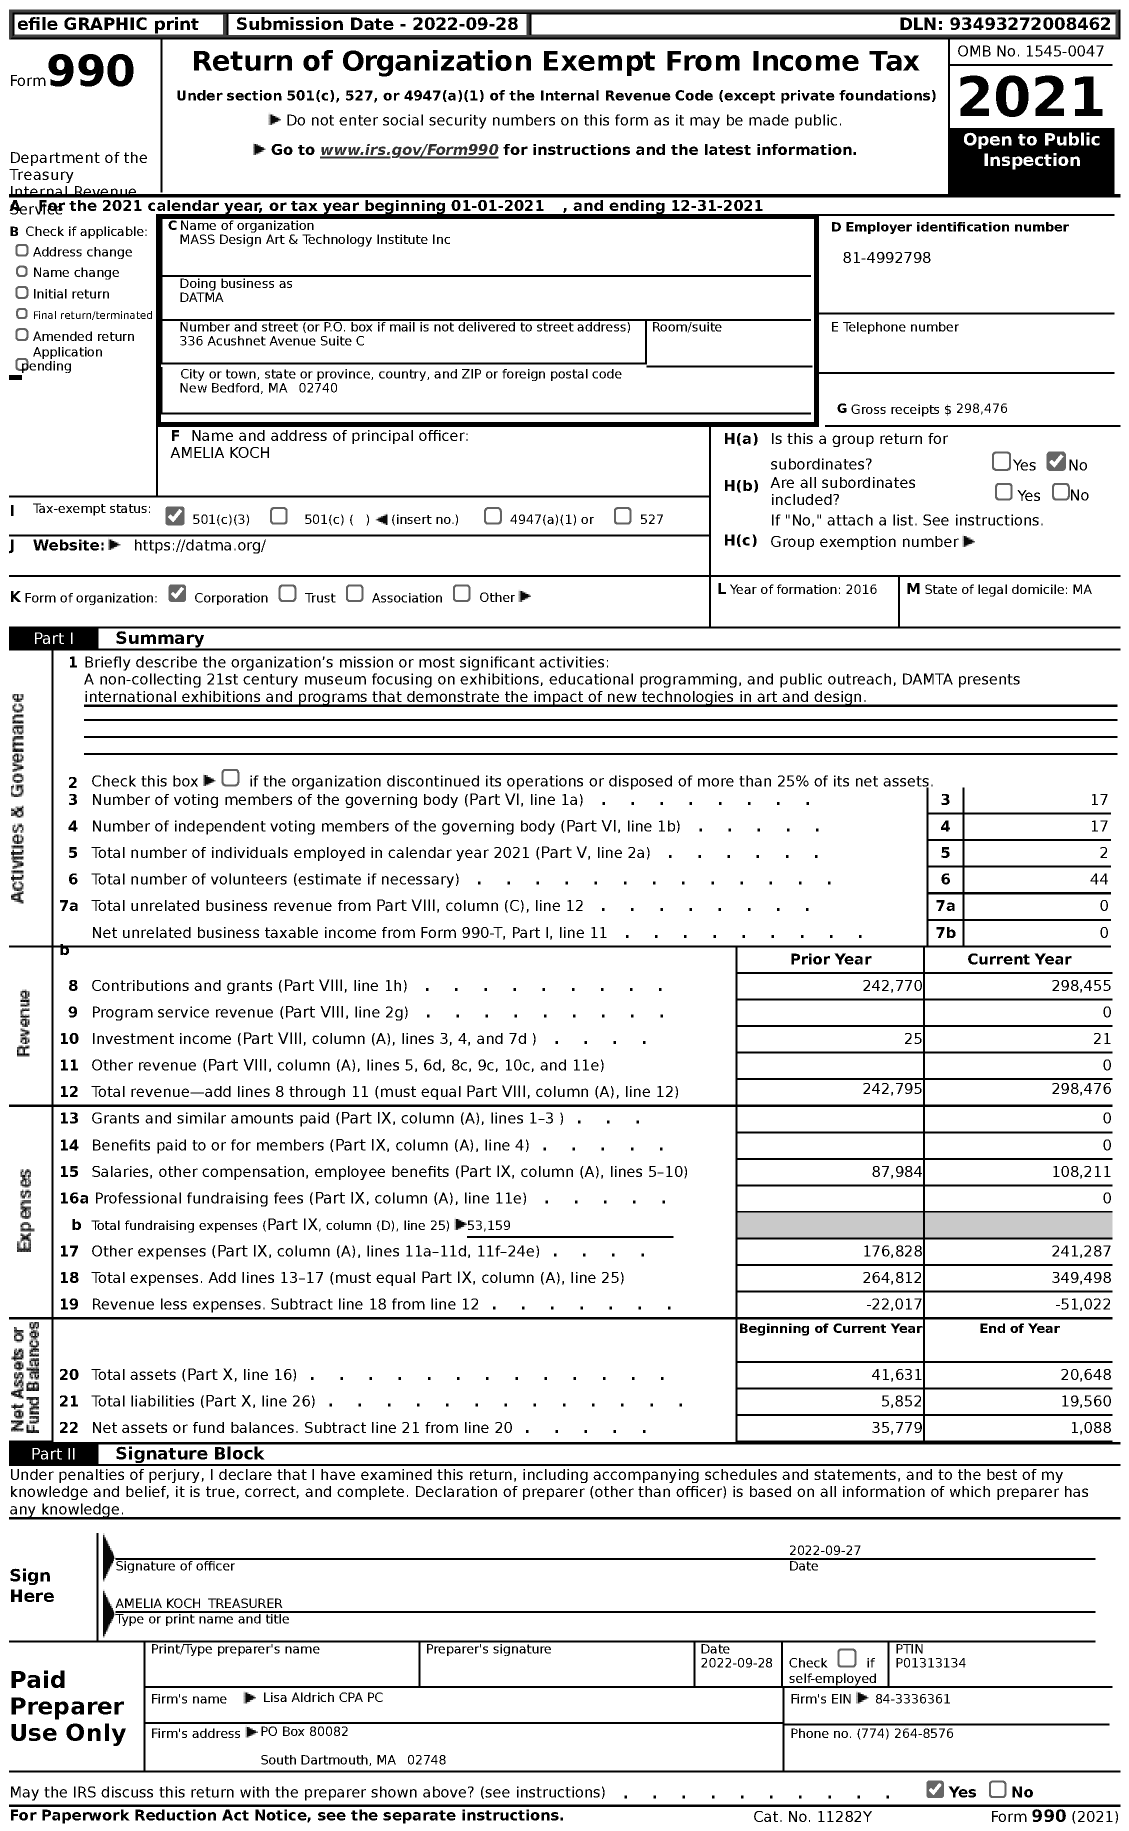 Image of first page of 2021 Form 990 for Datma